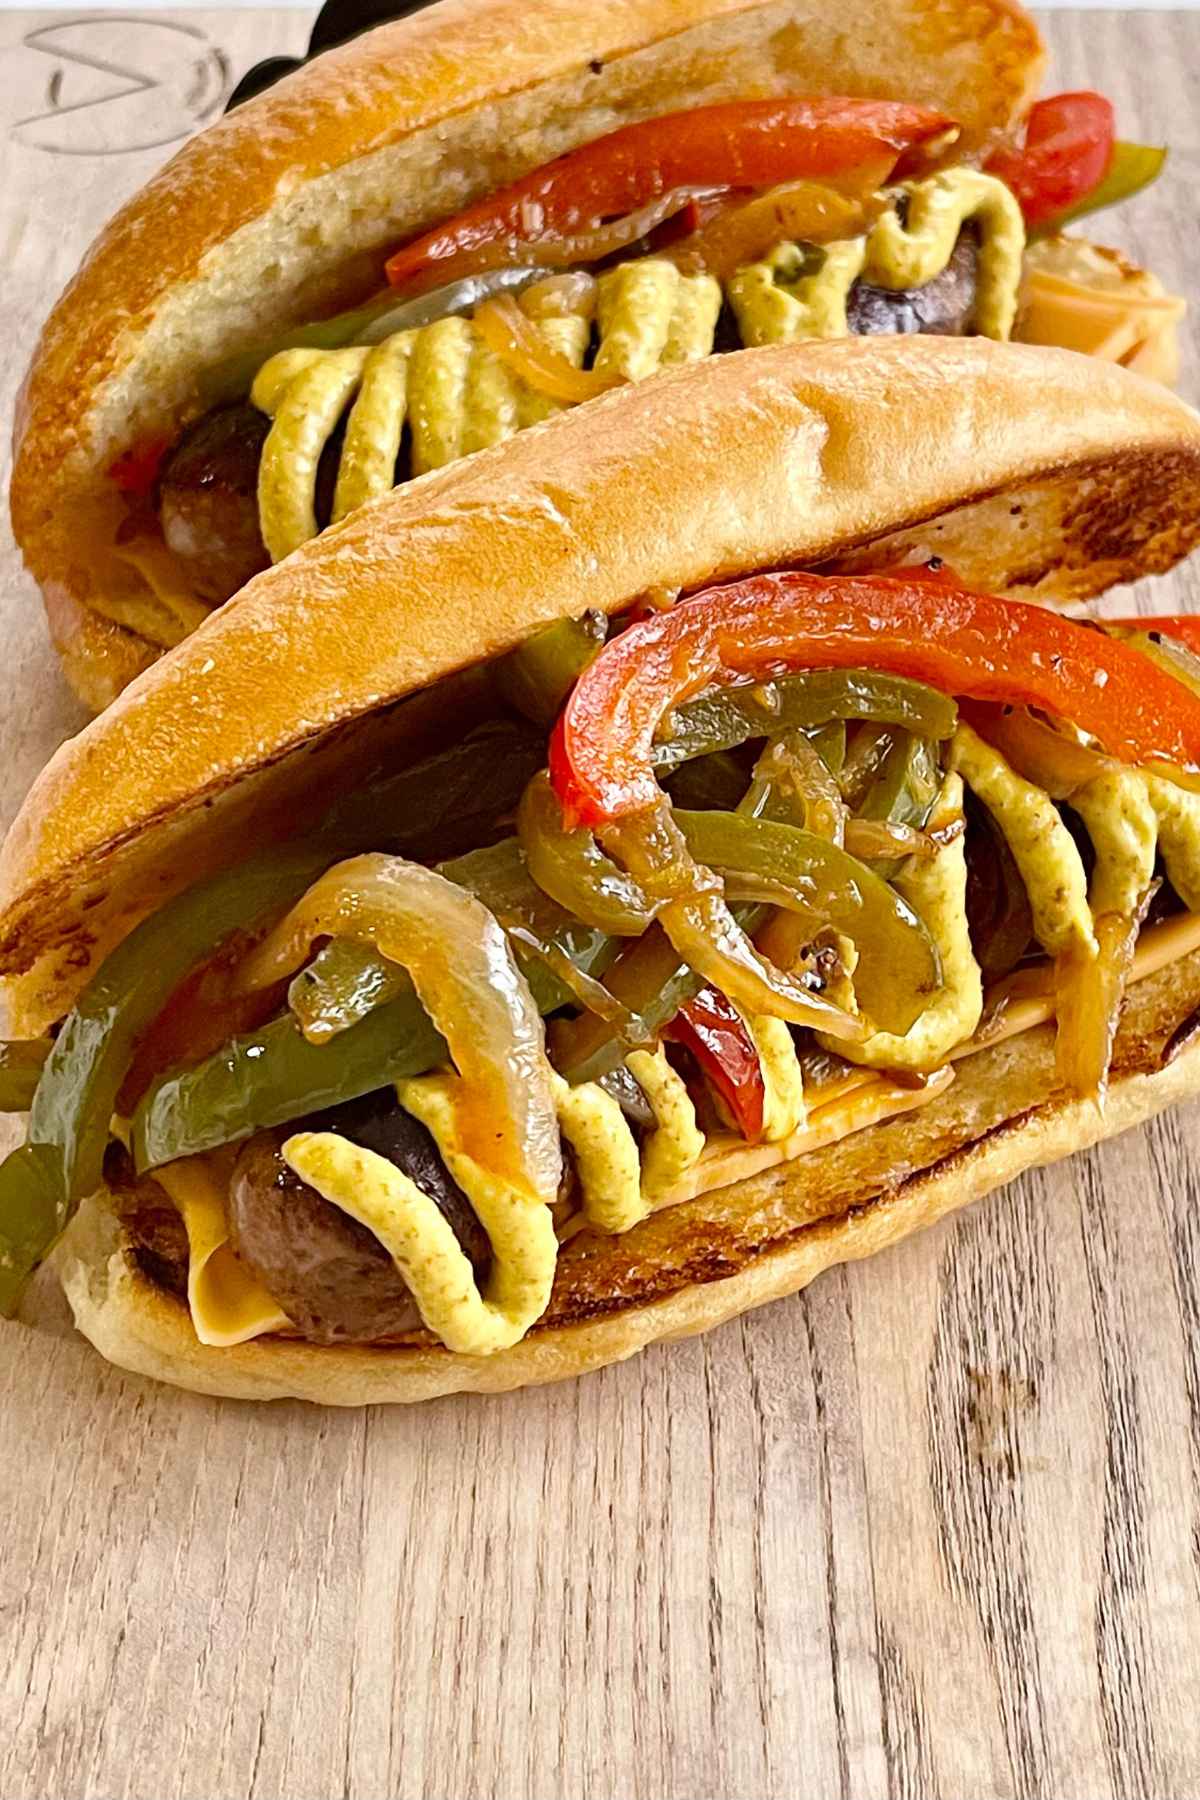 Whole Italian sausages in a toasted hoagie roll topped with mustard, peppers, and onions.